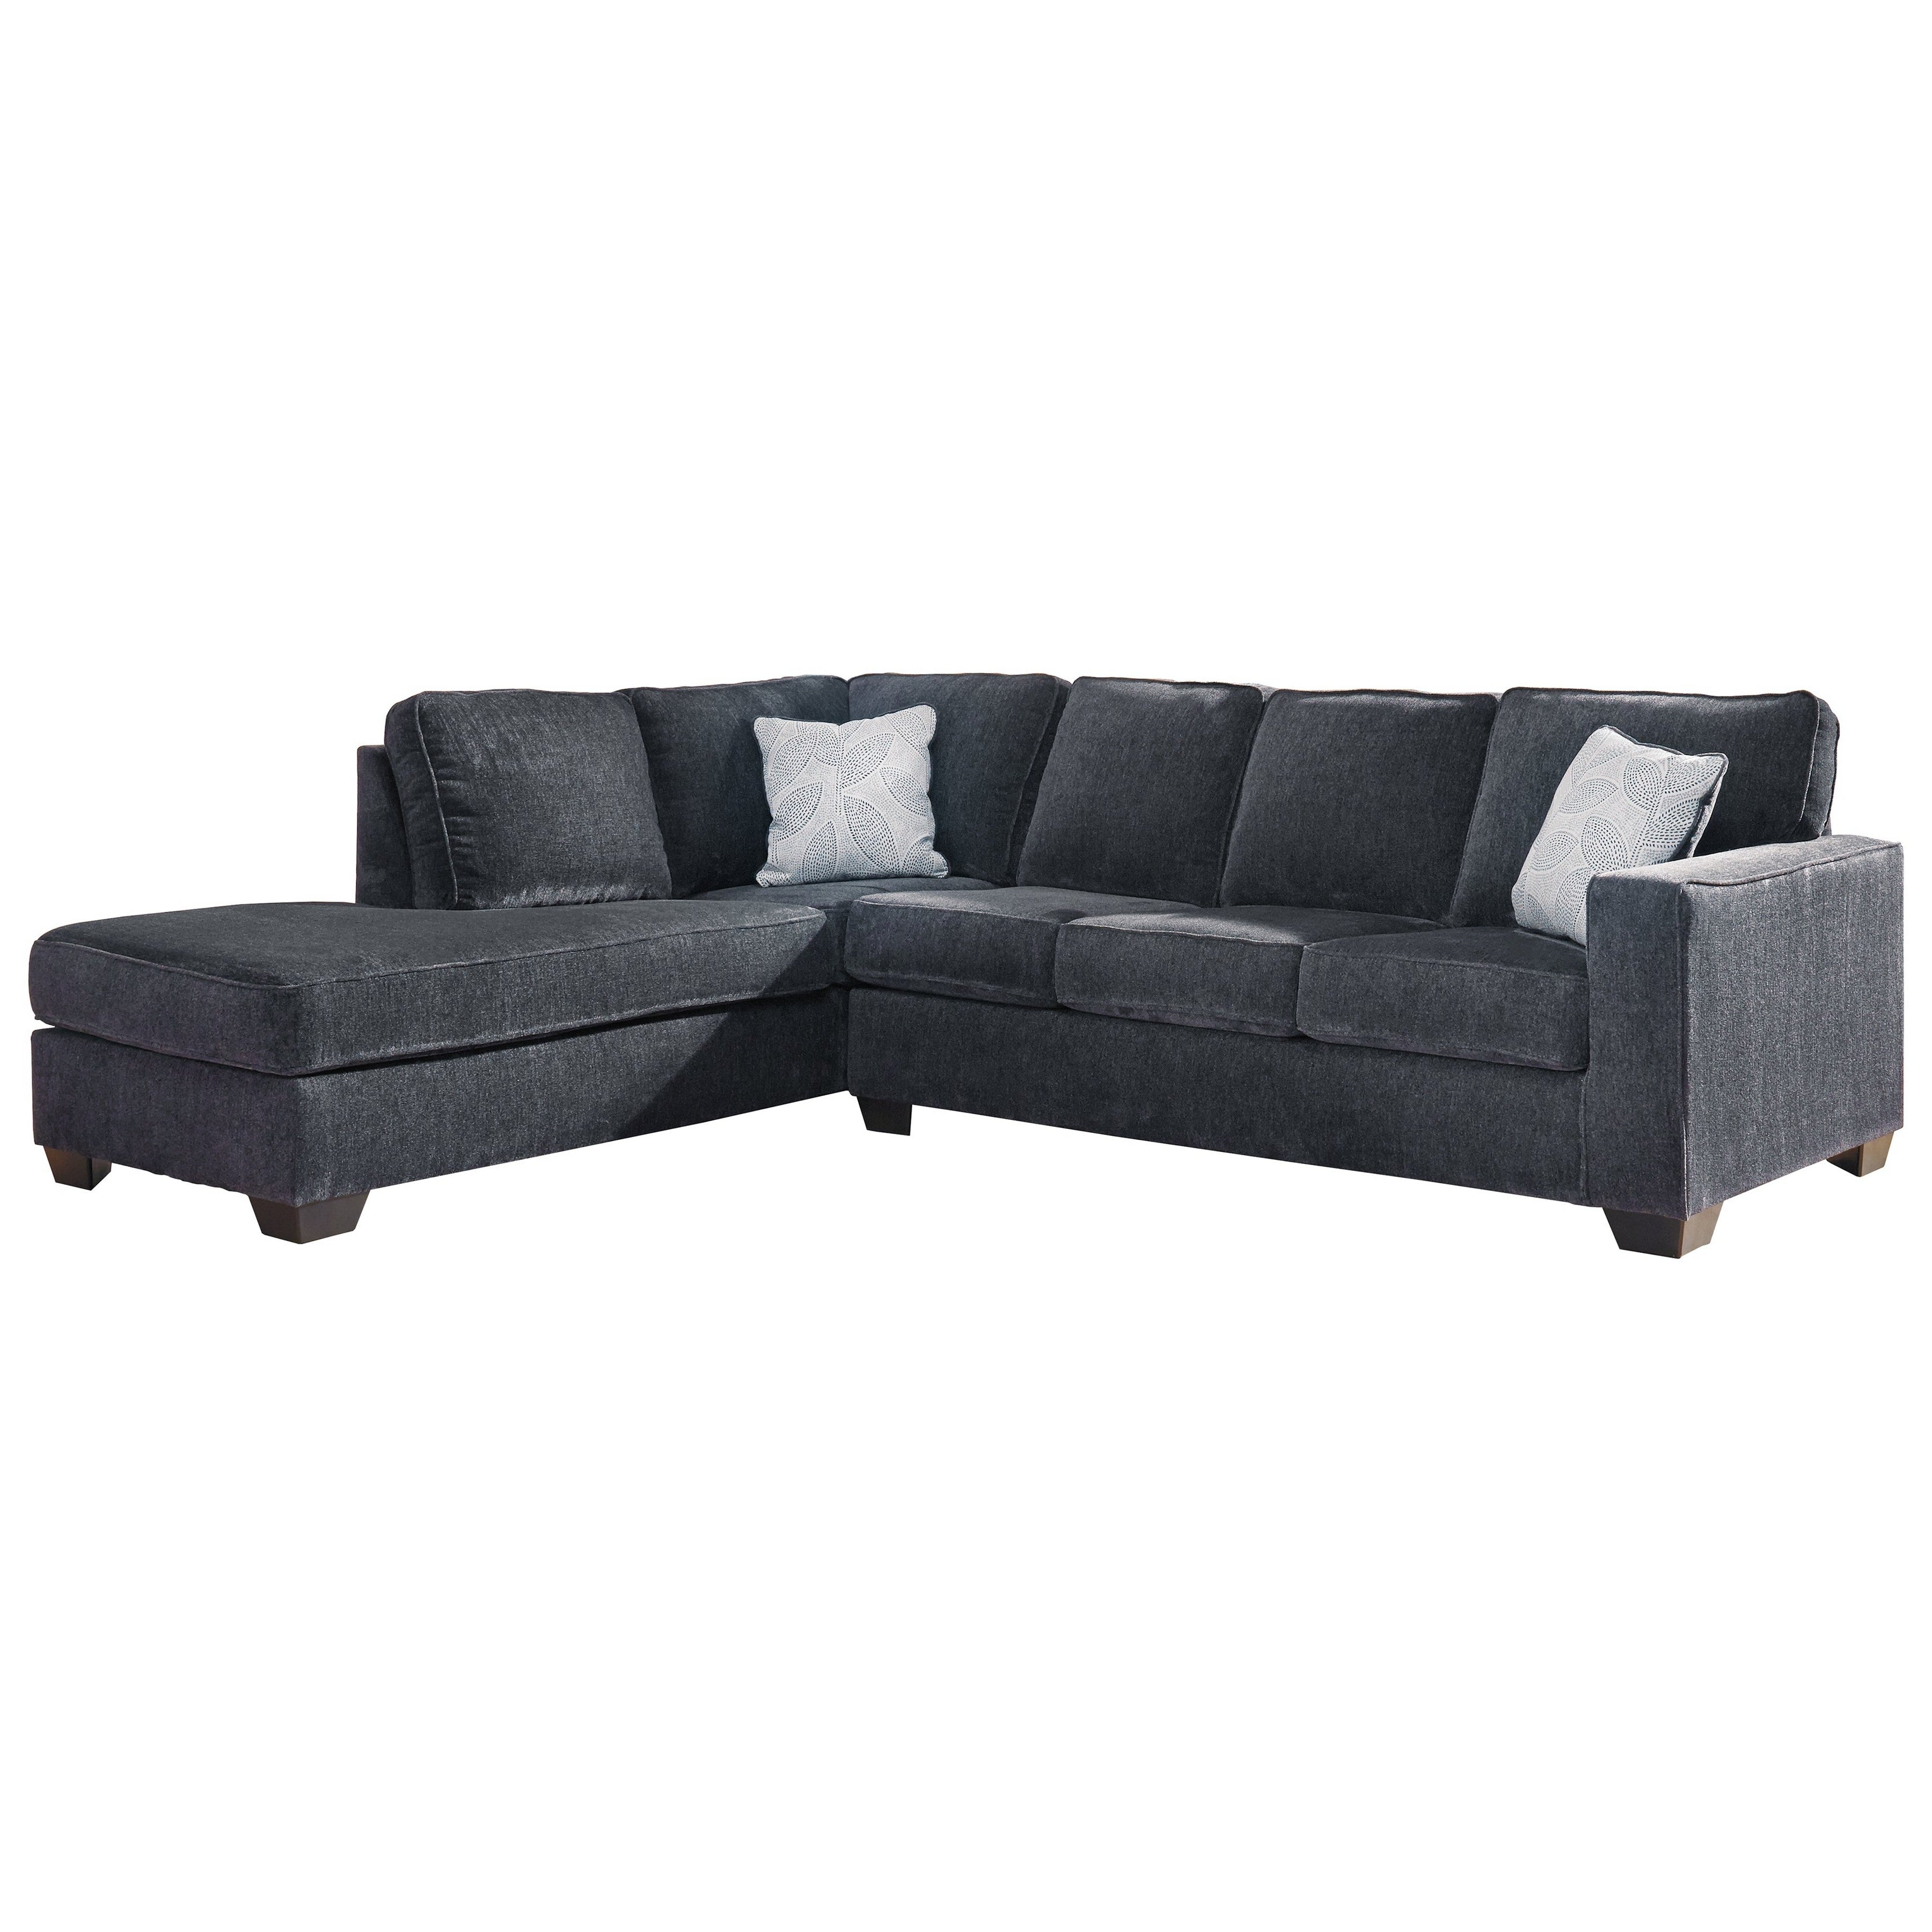 Altari 2-Piece Sectional with Chaise - Ash-87213S1 - Underkut